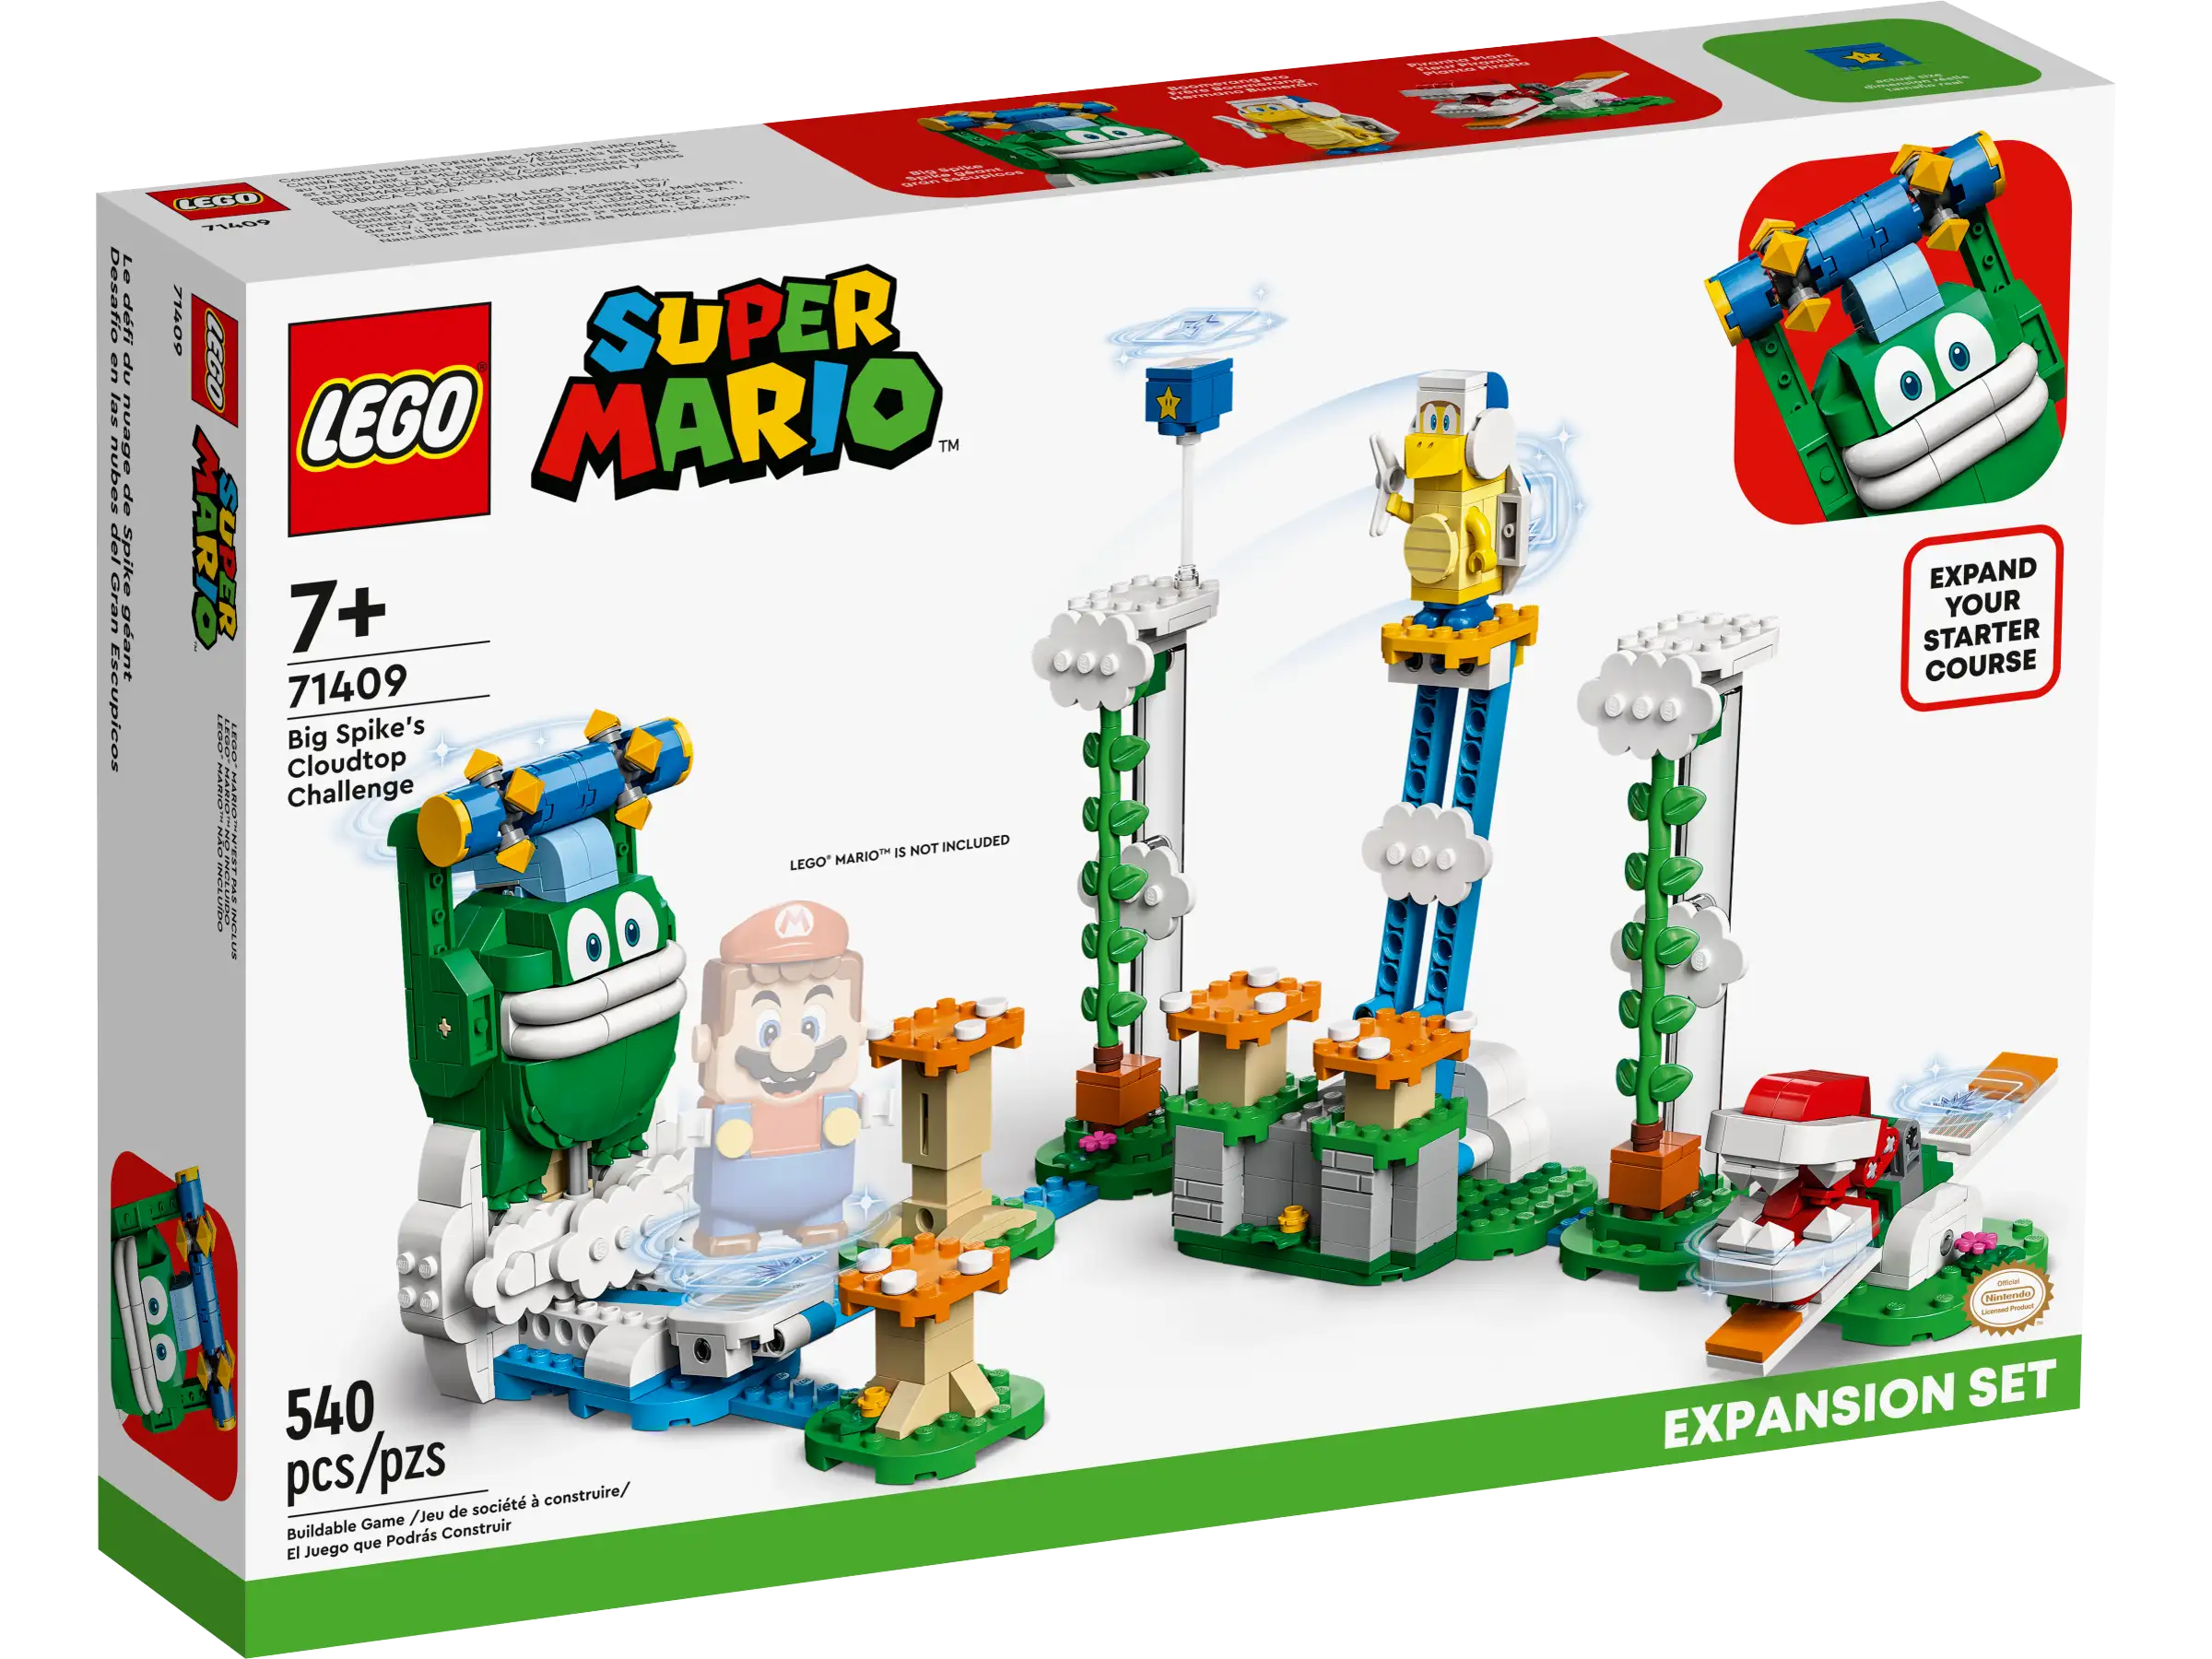 Kids can create their own LEGO® Super Mario™ sky level with the Big Spike’s Cloudtop Challenge Expansion Set (71409). It features familiar challenges from the Super Mario™ video games and LEGO figures of 3 popular enemies – a Big Spike, a Boomerang Bro and a Piranha Plant. Players earn digital coins for helping their LEGO® Mario™, LEGO® Luigi™ or LEGO® Peach™ figures (not included) battle the Big Spike, jump on the orange Mushroom Trampolines to get to the Boomerang Bro, use the Super Star Block and more. (Note: the 71360, 71387 or 71403 Starter Course is required for play.) Companion app Download the LEGO Super Mario app – it has building instructions, inspiring tips and other fun stuff to enhance kids’ creative experience. Top gift This playset makes an awesome gift toy for trendsetting kids aged 7+ and is ideal for solo or social play. LEGO Super Mario Starter Courses and Expansion Sets allow fans to expand, rebuild and create their own unique levels for hours of coin-collecting play. Introducing a new sky level – Let children take on Big Spike’s Cloudtop Challenge (71409) with this colorful LEGO® Super Mario™ Expansion Set featuring Super Mario™ enemy characters and challenges 3 LEGO® Super Mario™ figures – A Big Spike, a Boomerang Bro and a Piranha Plant Fun challenges – Dodge the spiked roller thrown by the Big Spike, gain Super Star Block power and jump on the seesaw to defeat the Piranha Plant and win digital coins Orange Mushroom Trampolines – Jump on the trampolines with LEGO® Mario™, LEGO® Luigi™ or LEGO® Peach™ (figures not included) to get to the Boomerang Bro Gift for ages 7 and up – This 540-piece set makes a fun birthday or holiday gift for trendsetting kids who own a LEGO® Super Mario™ Starter Course (71360, 71387 or 71403), which is needed for play Rebuild and mix – Measuring over 7 in. (19 cm) high, 14.5 in. (38 cm) wide and 9.5 in. (25 cm) deep in its basic formation, this modular set combines with other LEGO® Super Mario™ toy playsets Companion app – Download the LEGO® Super Mario™ app for building instructions, inspiring ideas and more. For a list of compatible Android and iOS devices, visit LEGO.com/devicecheck Inspire kids’ creativity – Collectible LEGO® Super Mario™ toys are designed for solo or social play, offering coin-collecting fun and unlimited creative challenges through expansion and rebuilding Premium quality – Since 1958, LEGO® components have complied with demanding industry quality standards to ensure that they connect simply and strongly for robust builds Safety is a priority – LEGO® building bricks are tested in almost every way imaginable to make sure that they meet strict global safety standards